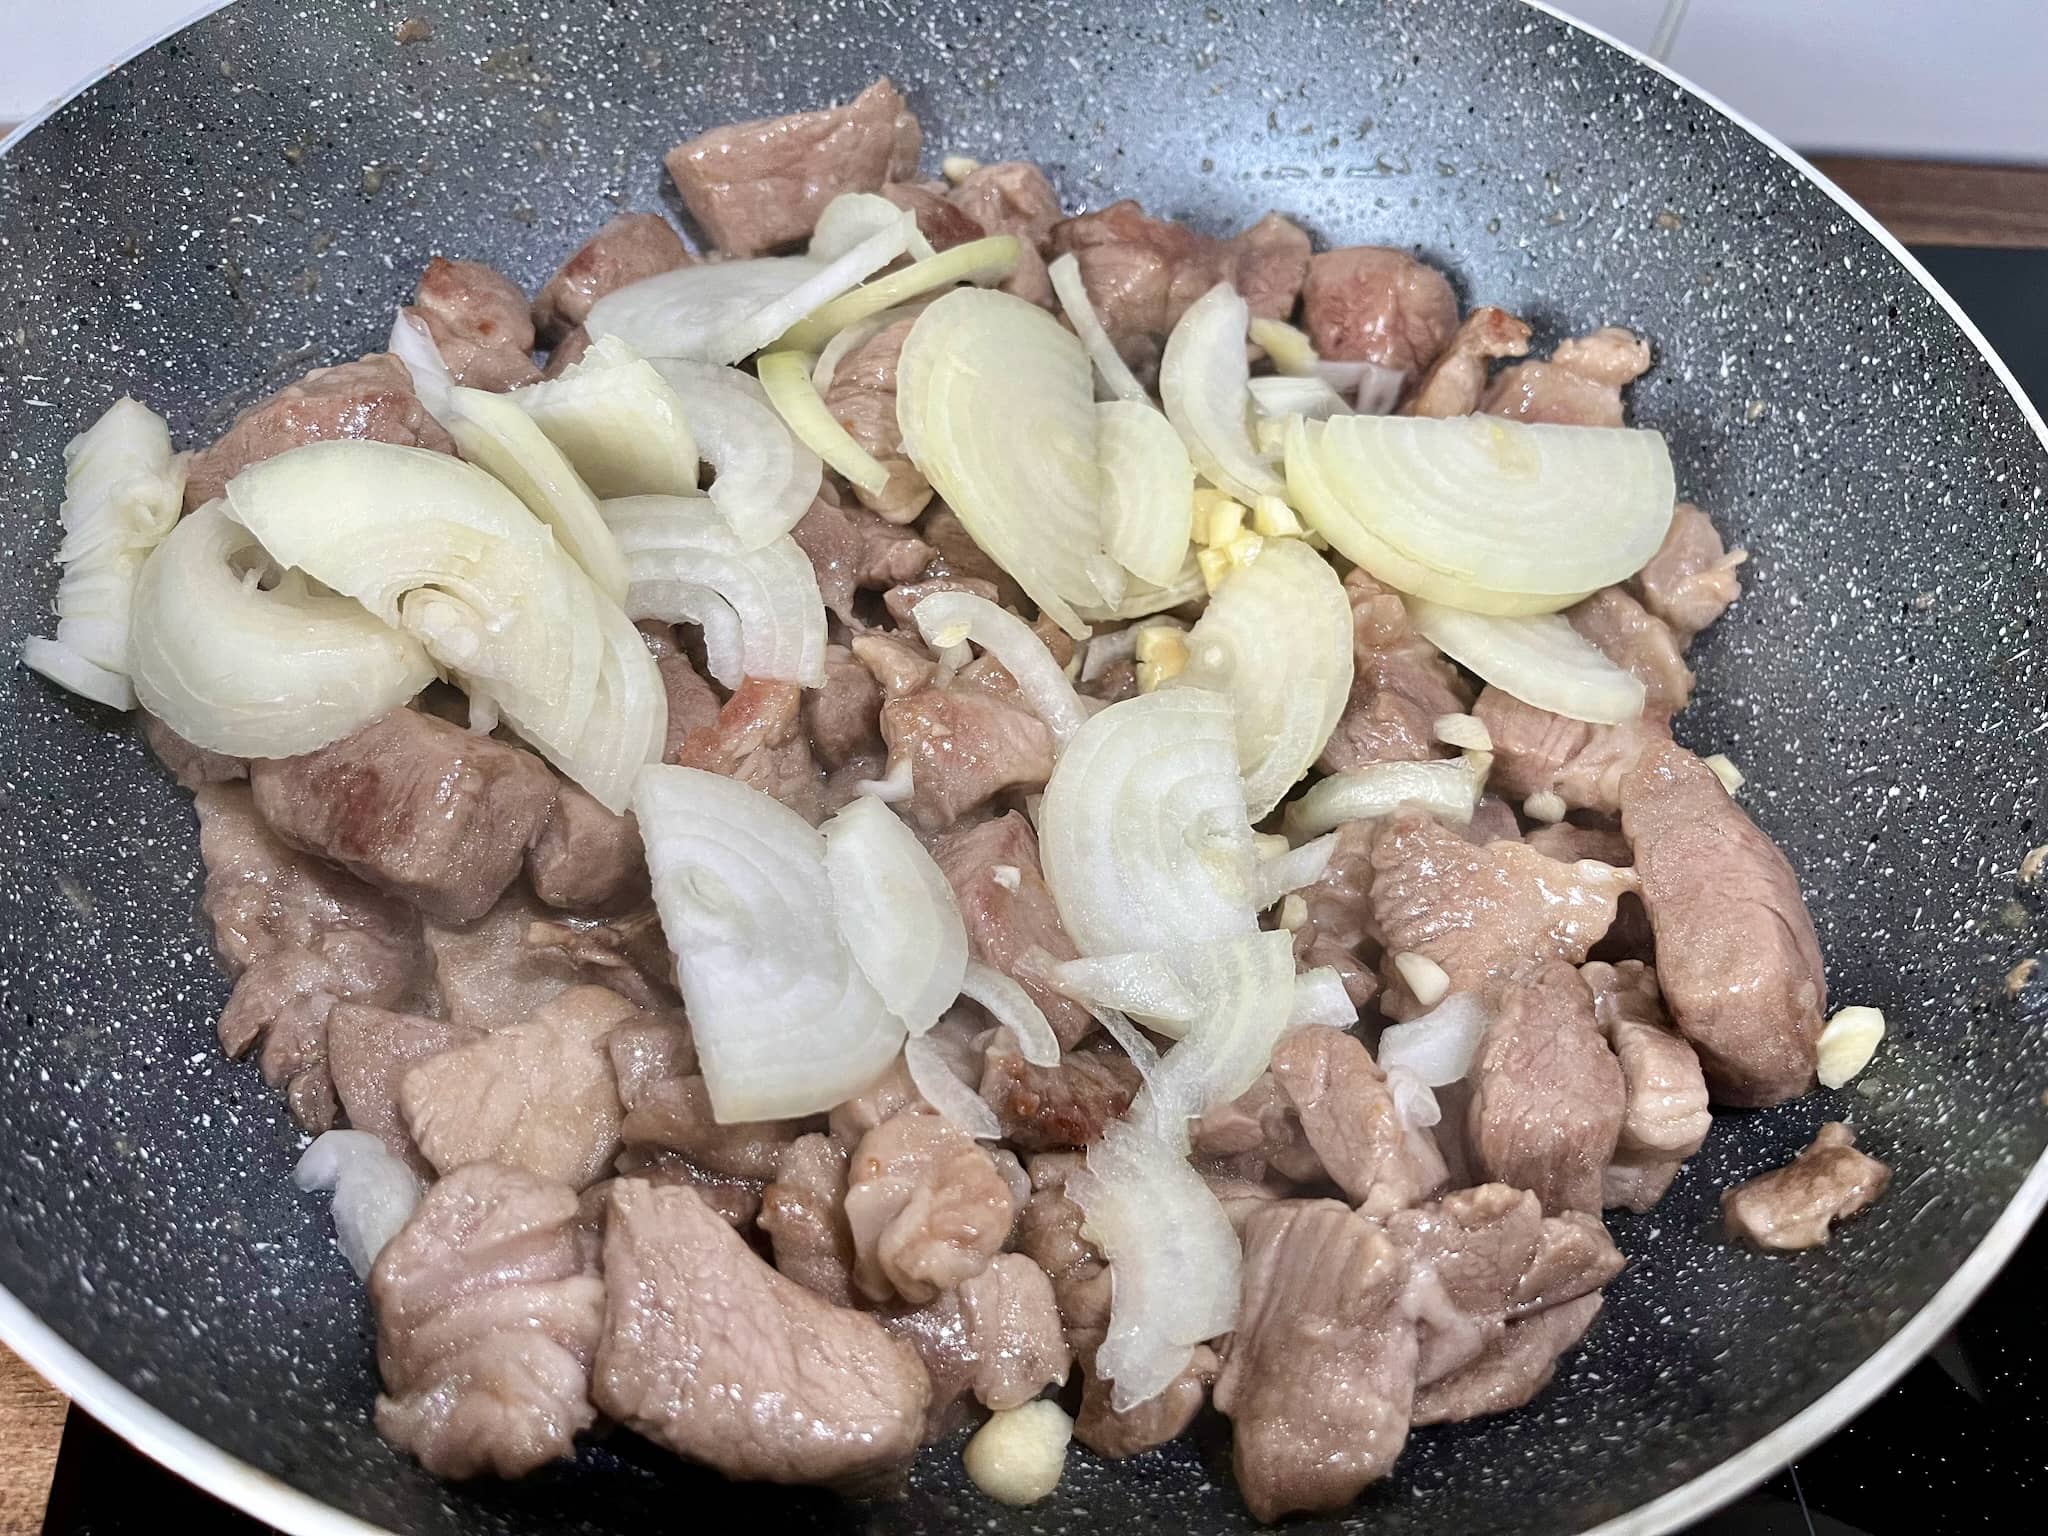 Fried pork in a pan with added chopped onion and crushed garlic